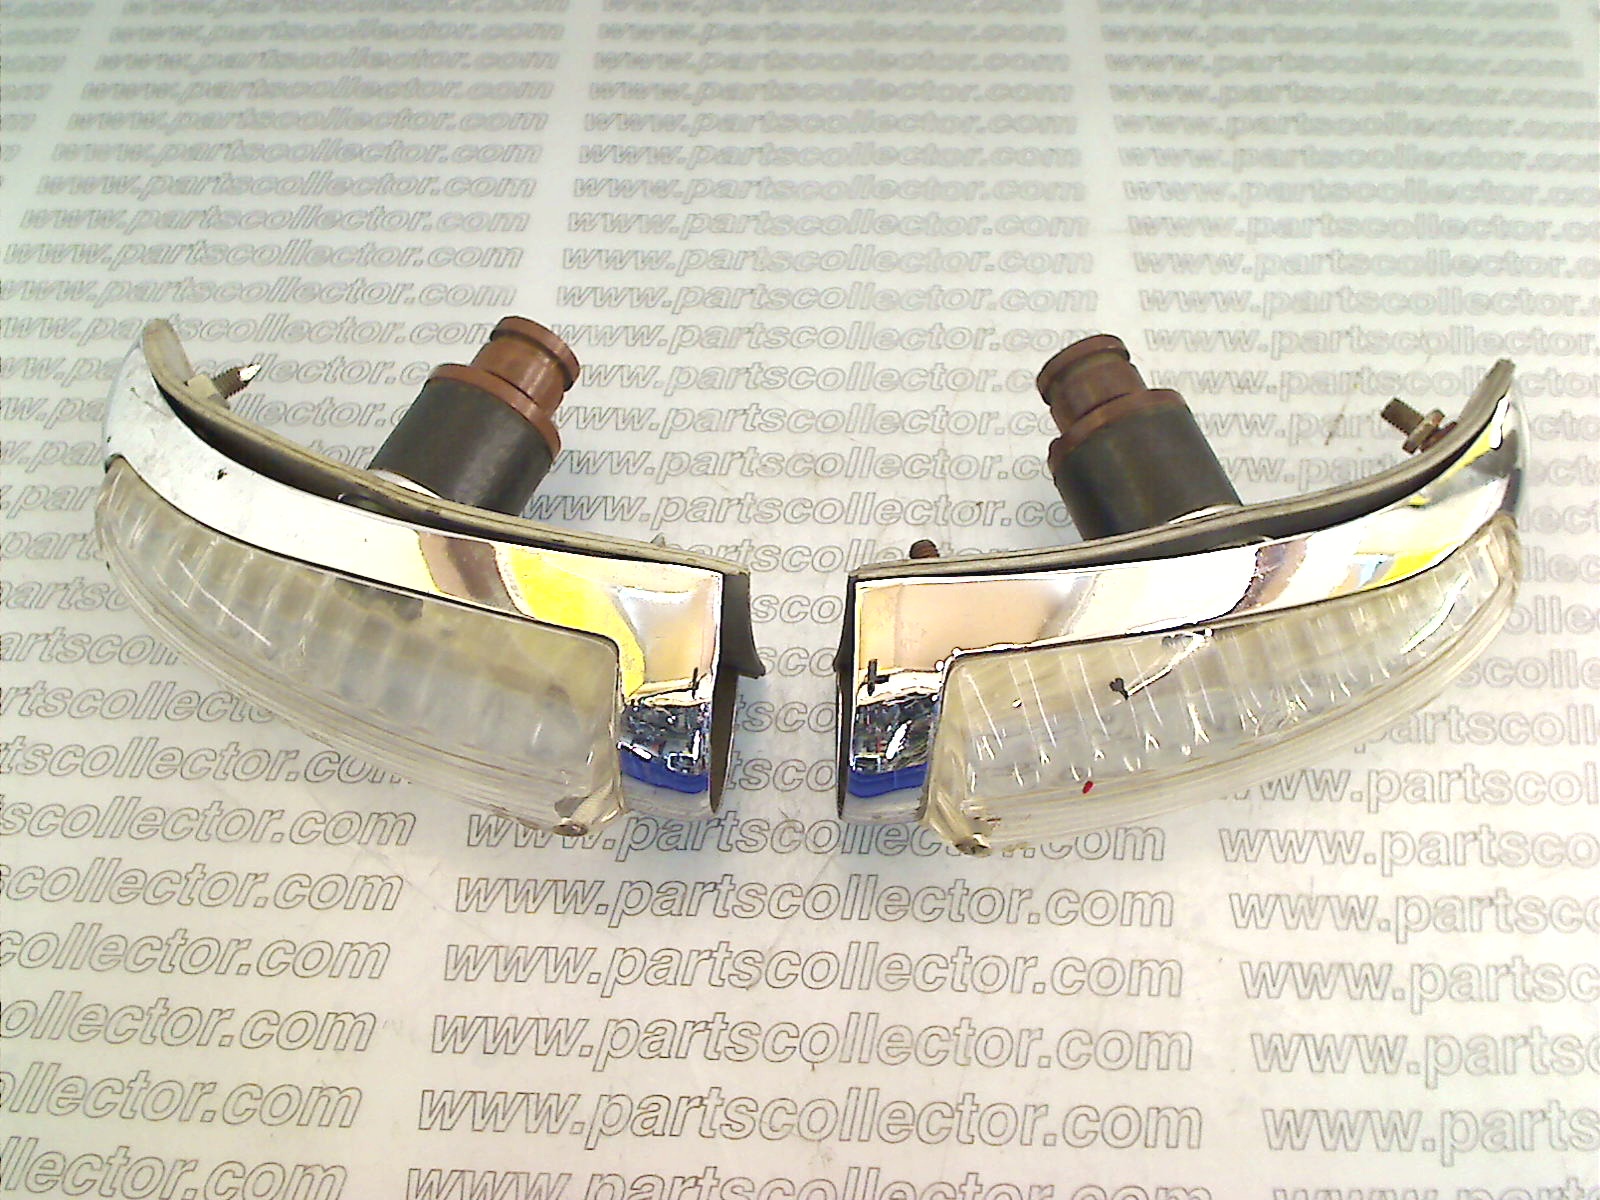 PAIR OF FRONT LIGHTS